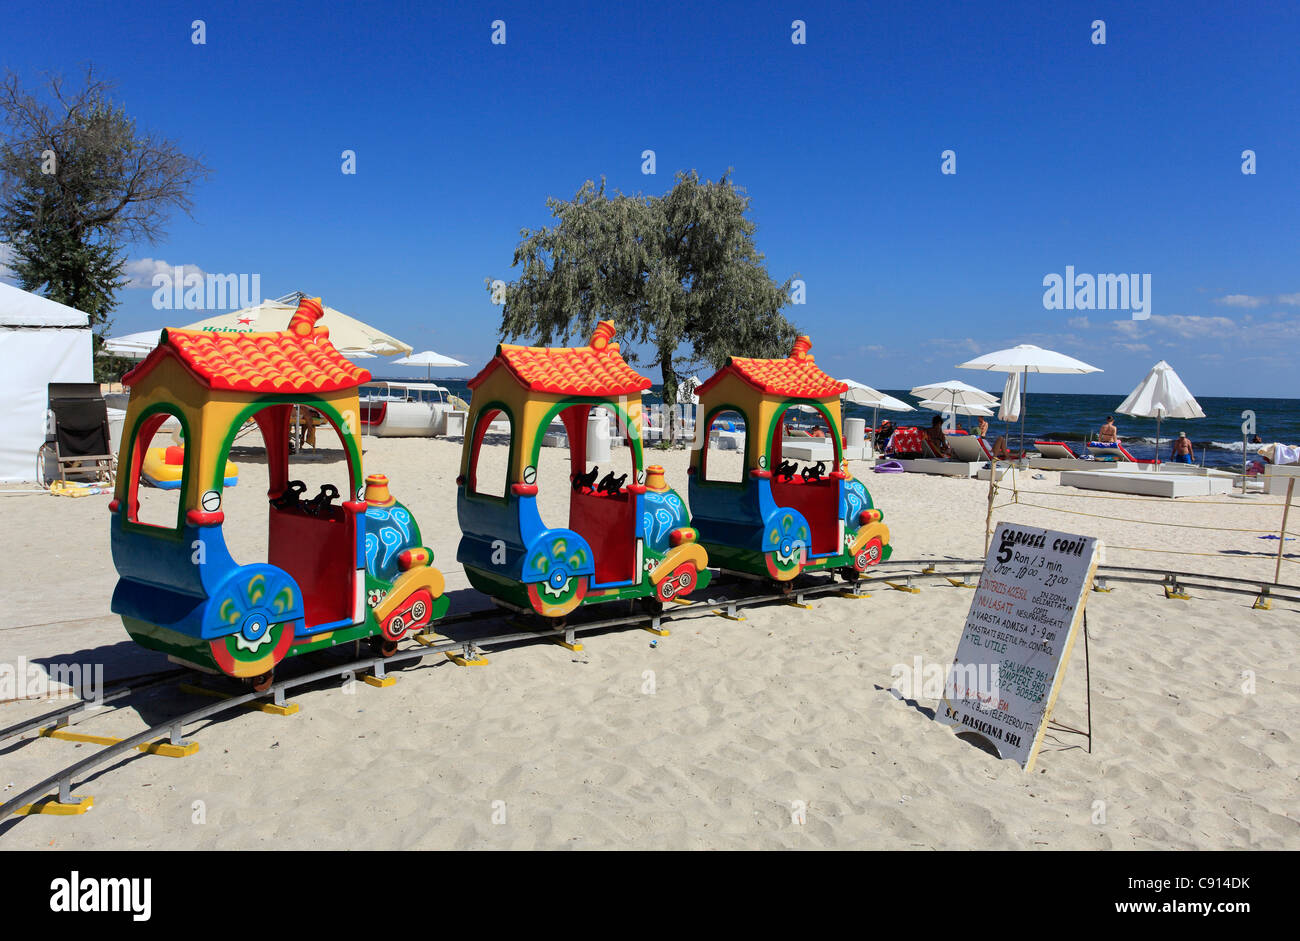 Mamaia is a resort near Constanta on the Black sea coast in Romania.  There is a childrens' train ride on the beach. Stock Photo